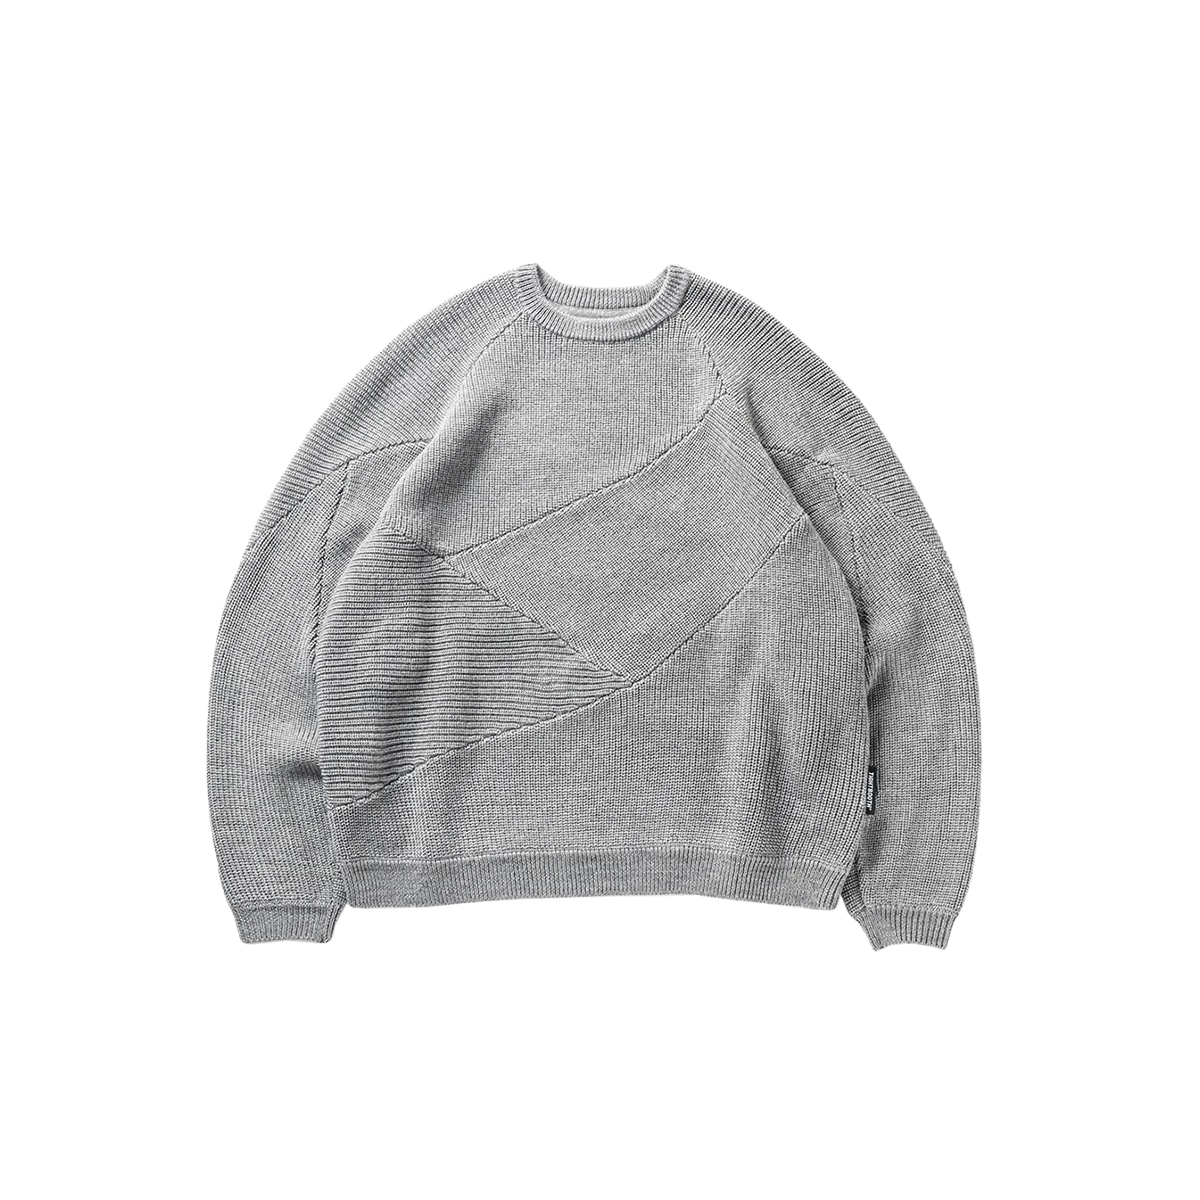 TIGHTBOOTH - Splice Knit Sweater - 3 Colors